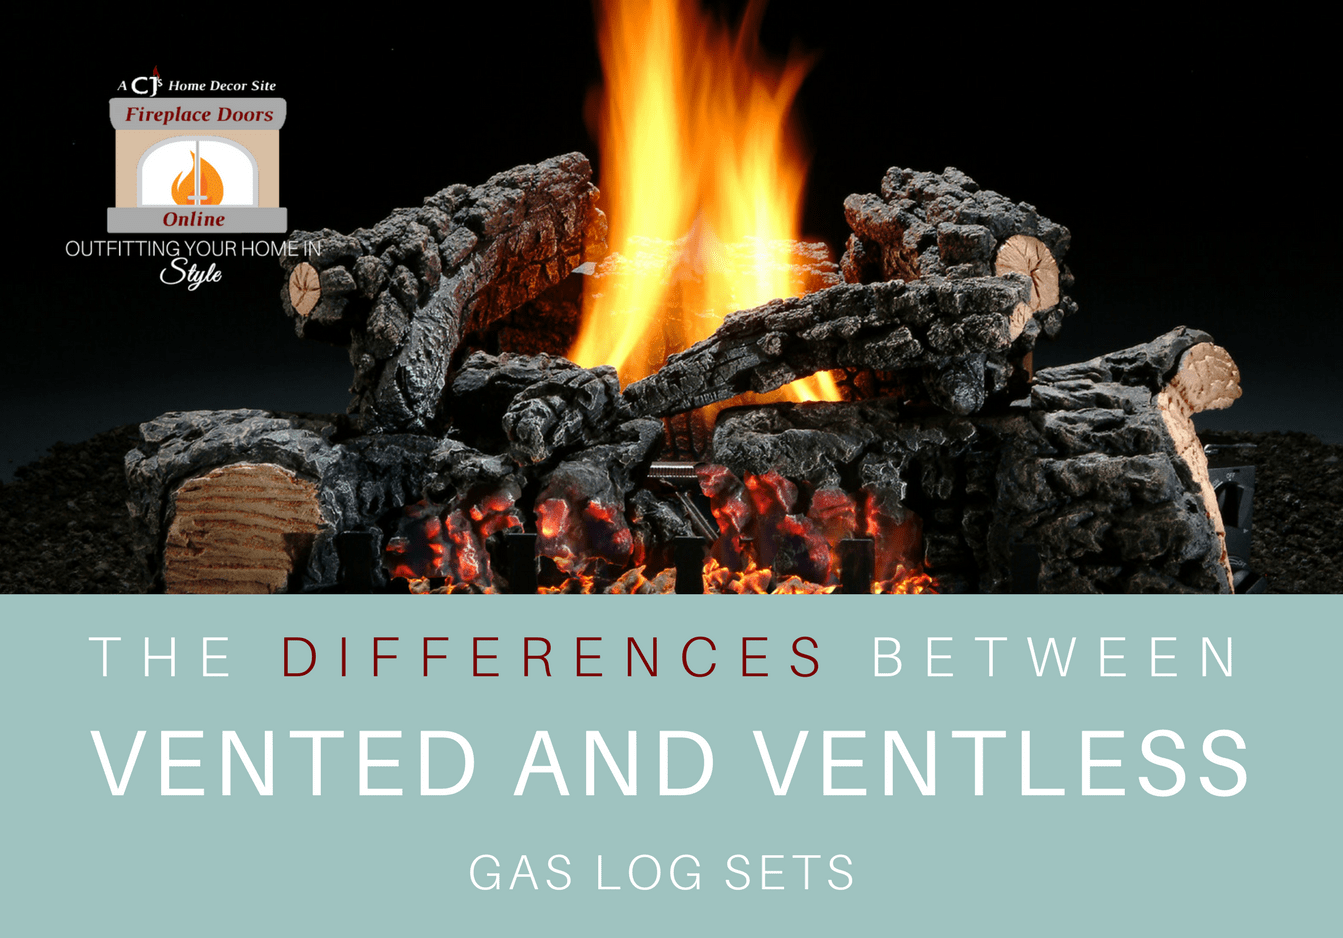 Vented And Ventless Gas Log Sets, Difference Between Vented And Ventless Gas Fireplaces